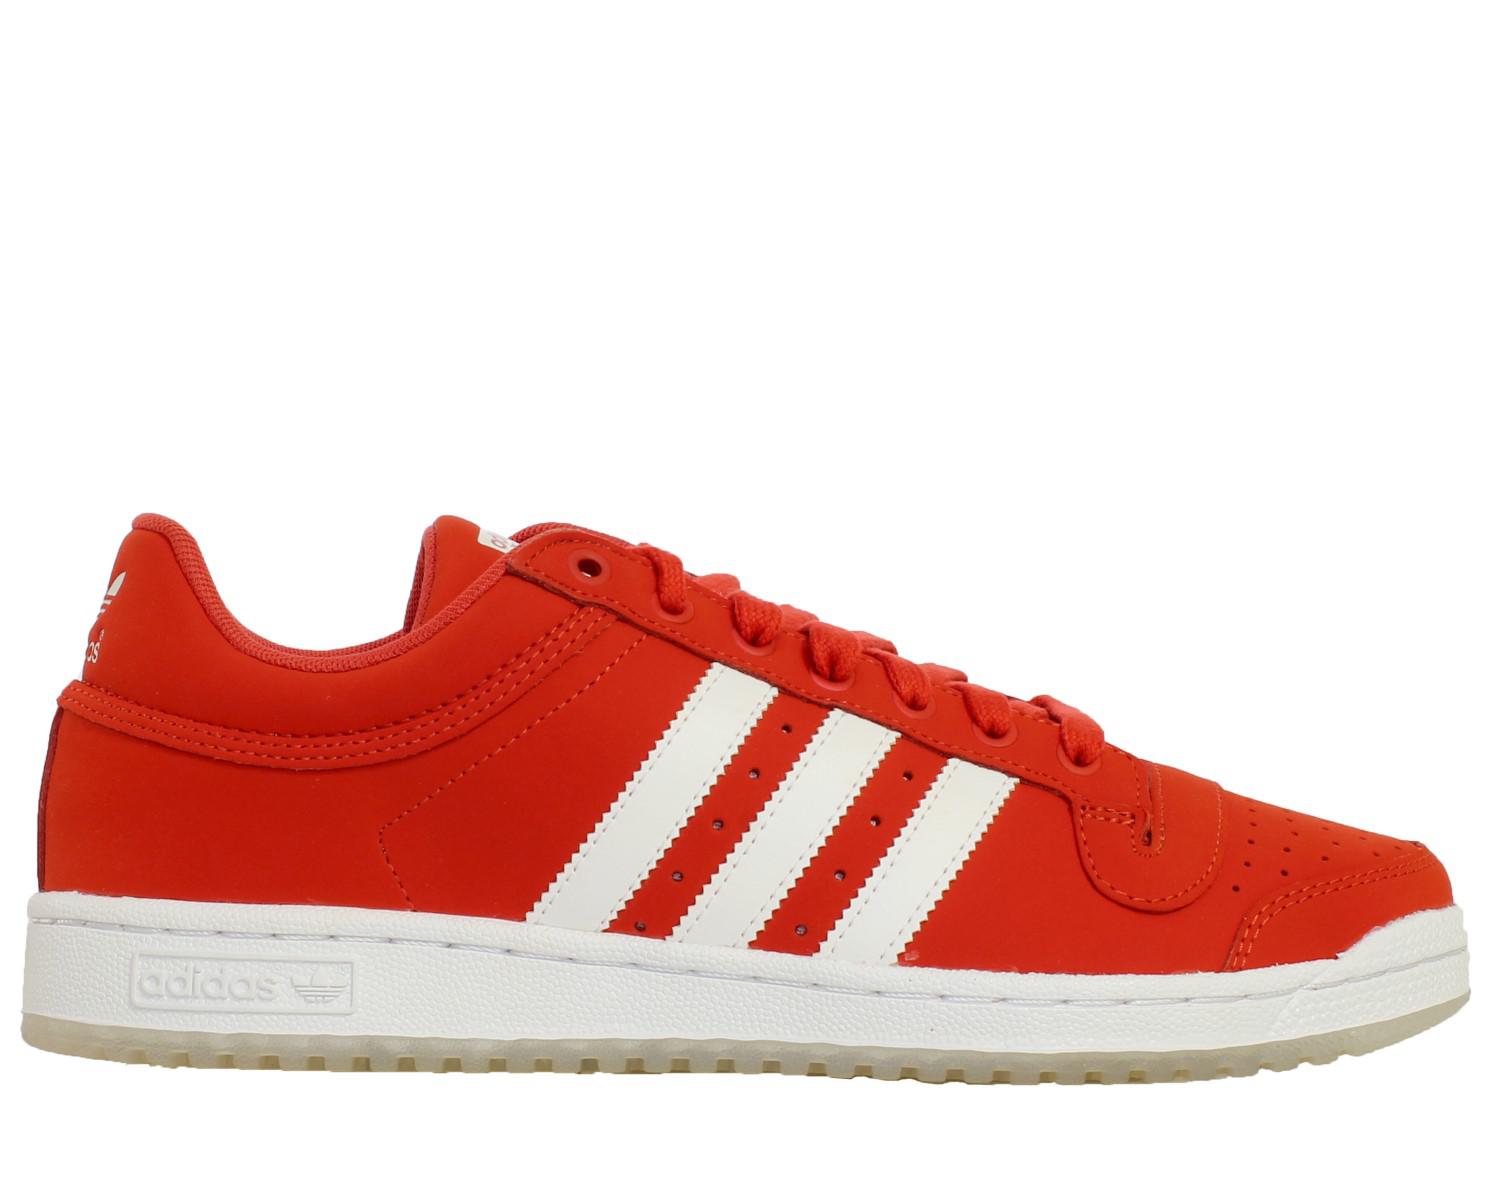 Lyst - Adidas Originals Top Ten Lo Basketball Shoes Size 11.5 in Red ...